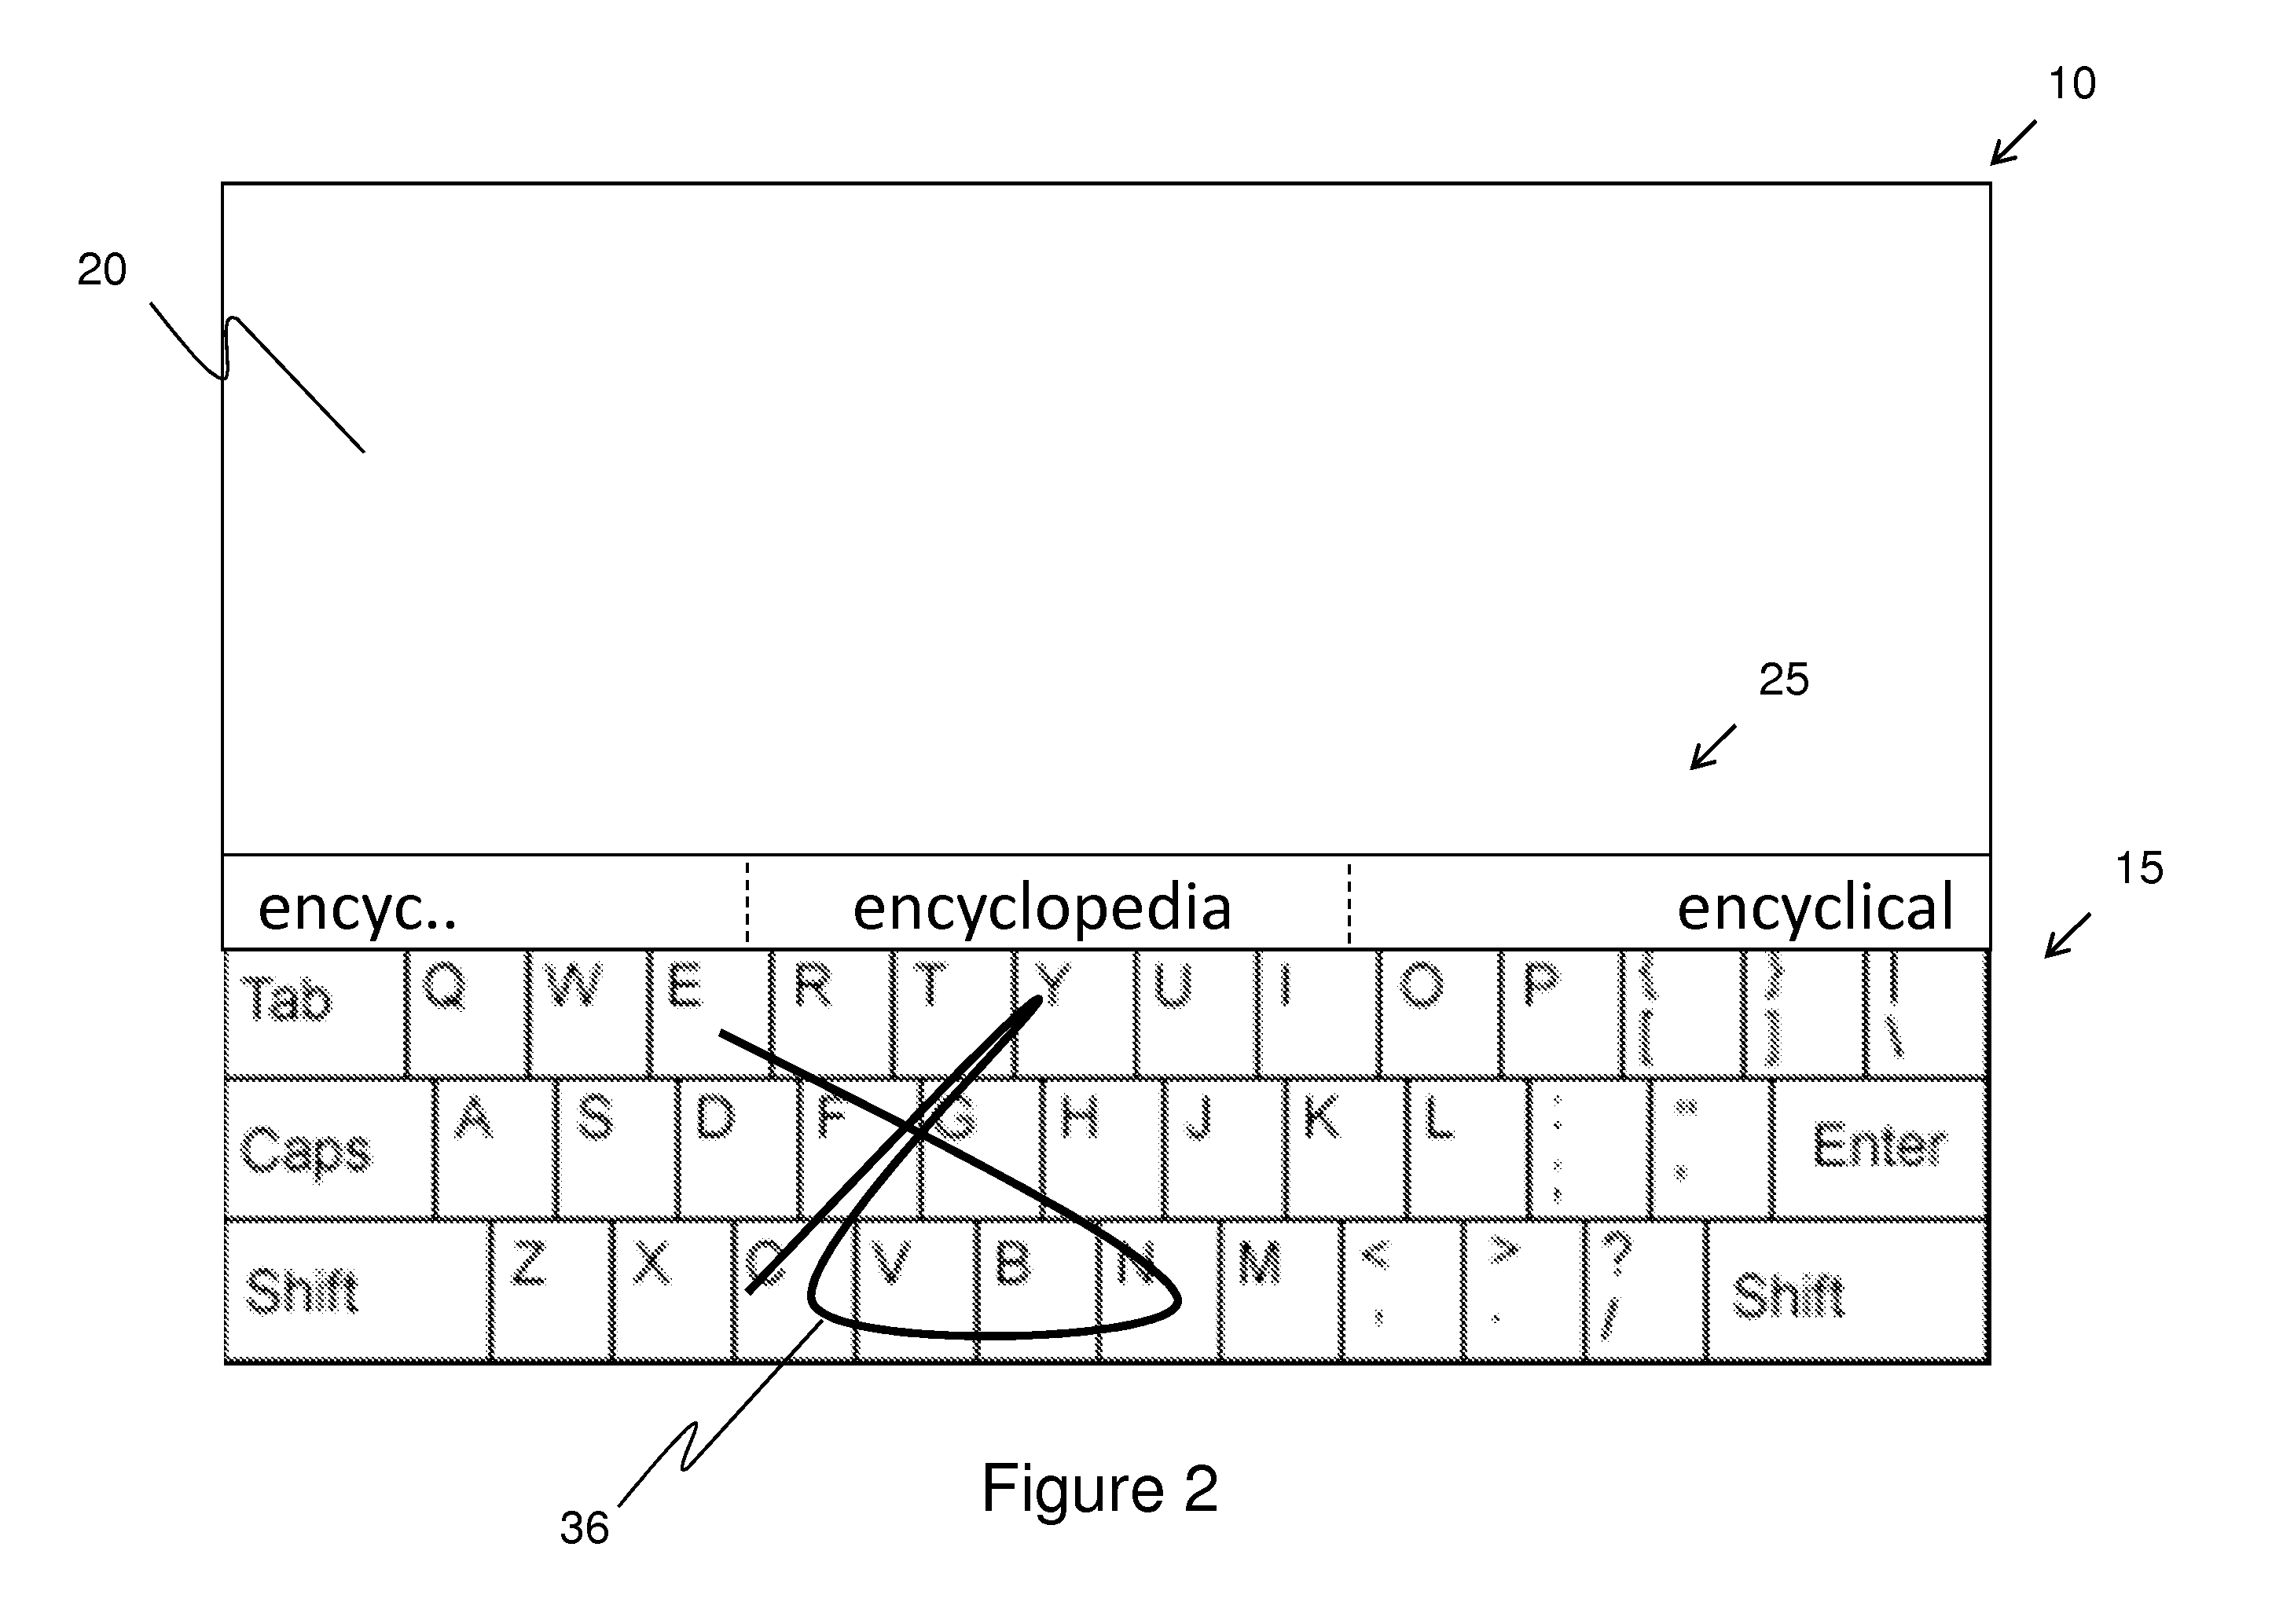 Reduced keyboard with prediction solutions when input is a partial sliding trajectory